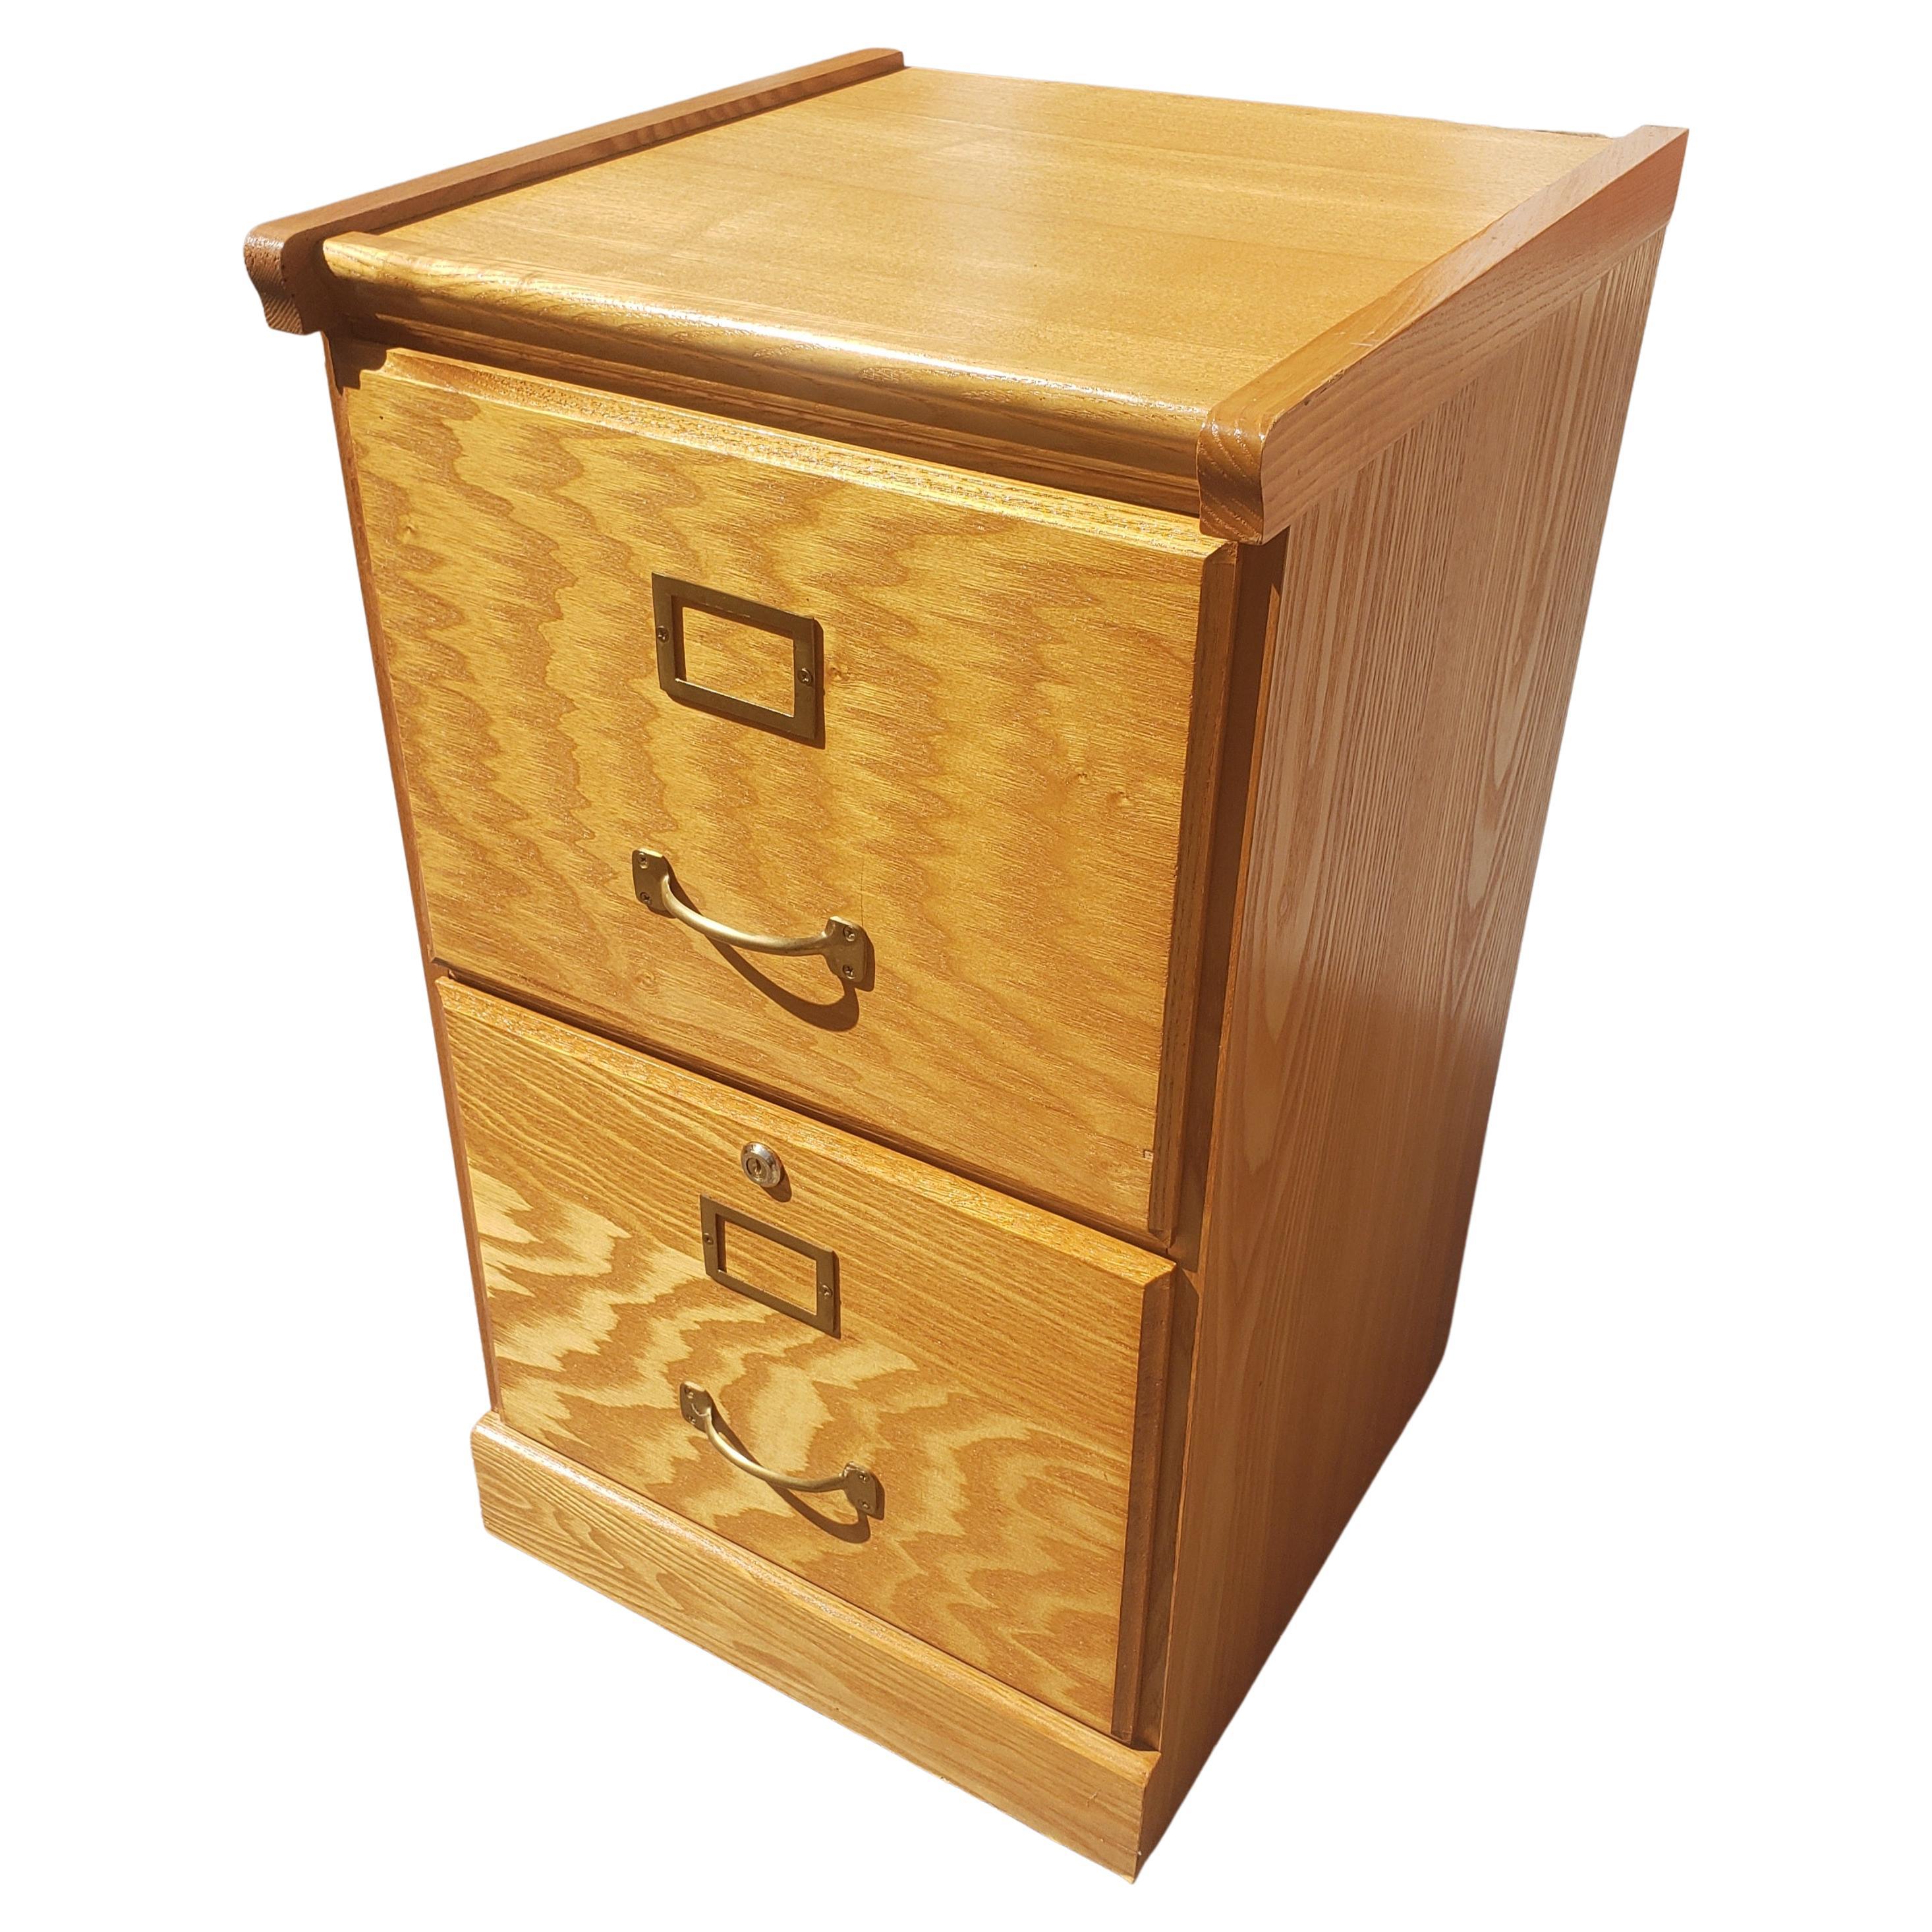 2 drawer wooden file cabinet with lock